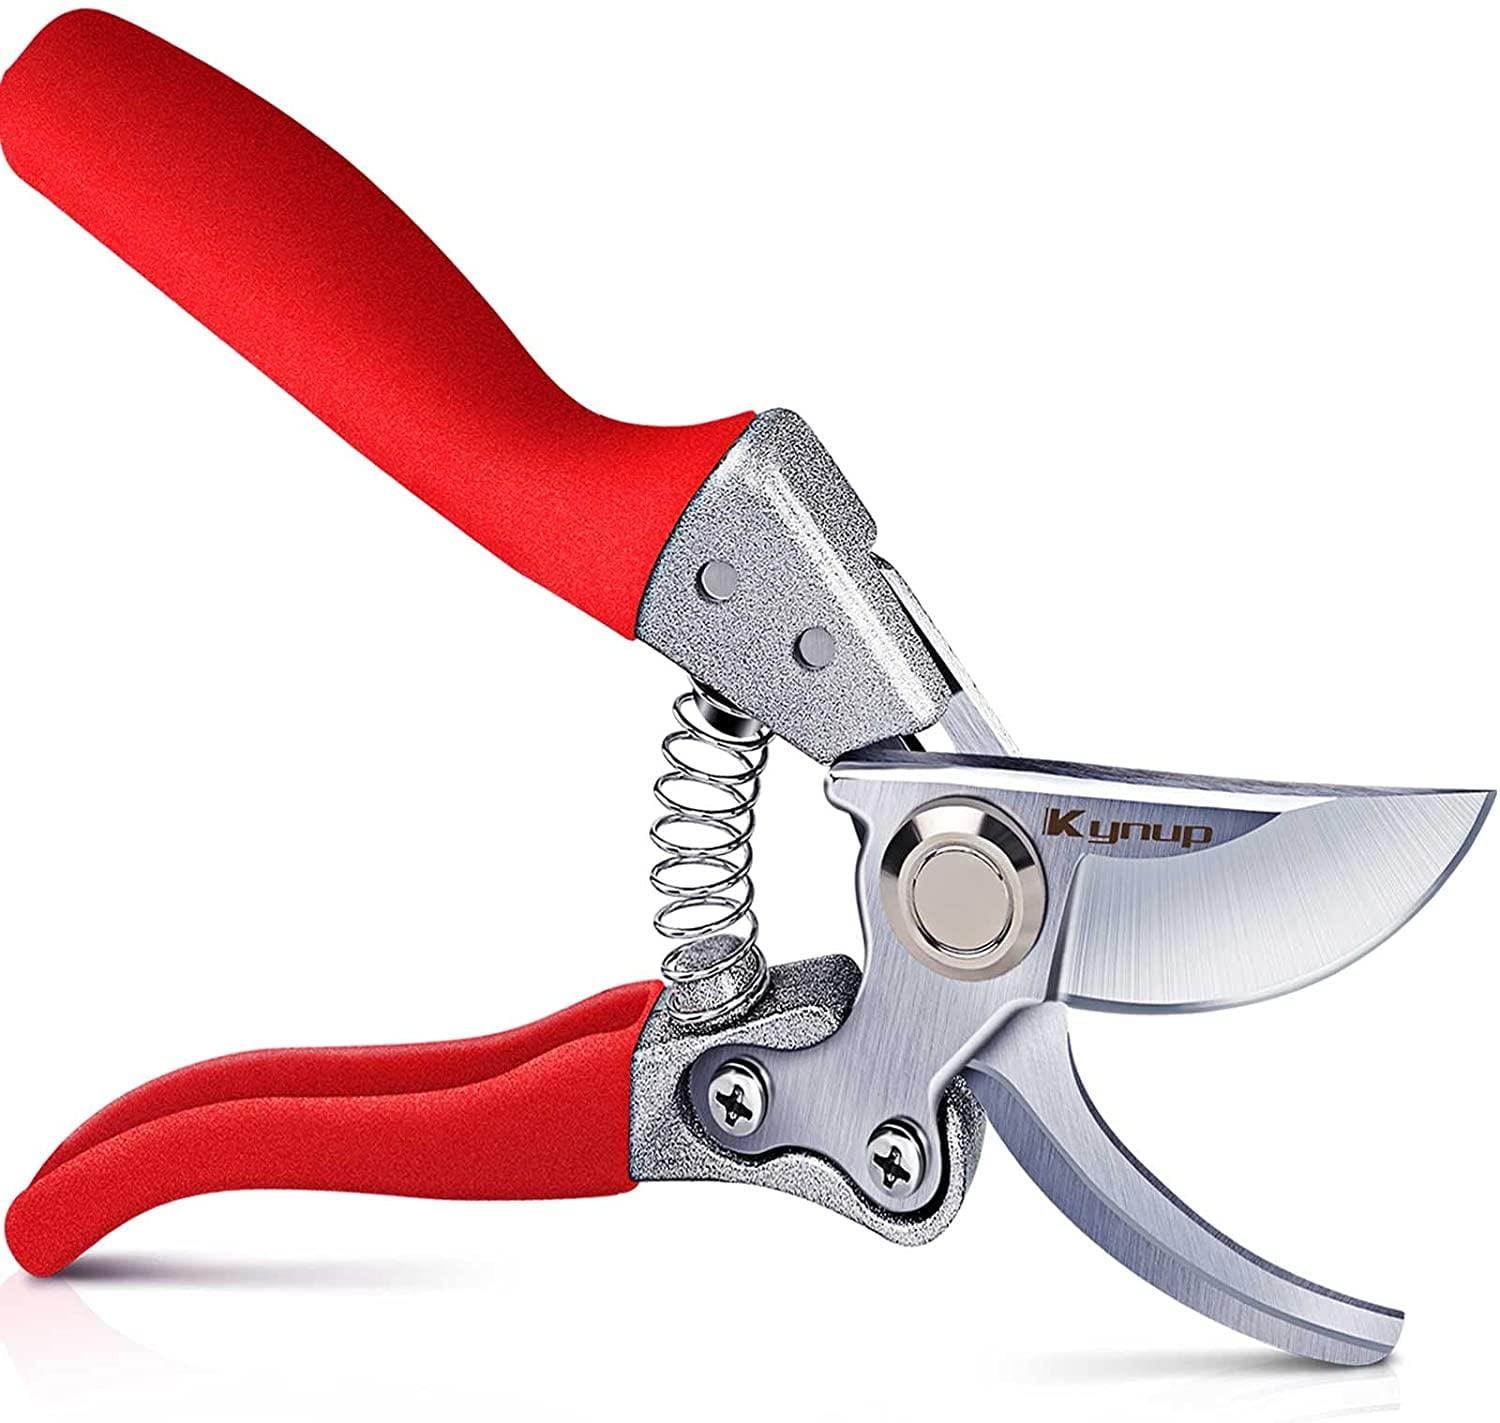 Tree Trimmers Secateurs Gardening Shears Hedge,Garden Shears,Clippers,Trimming 